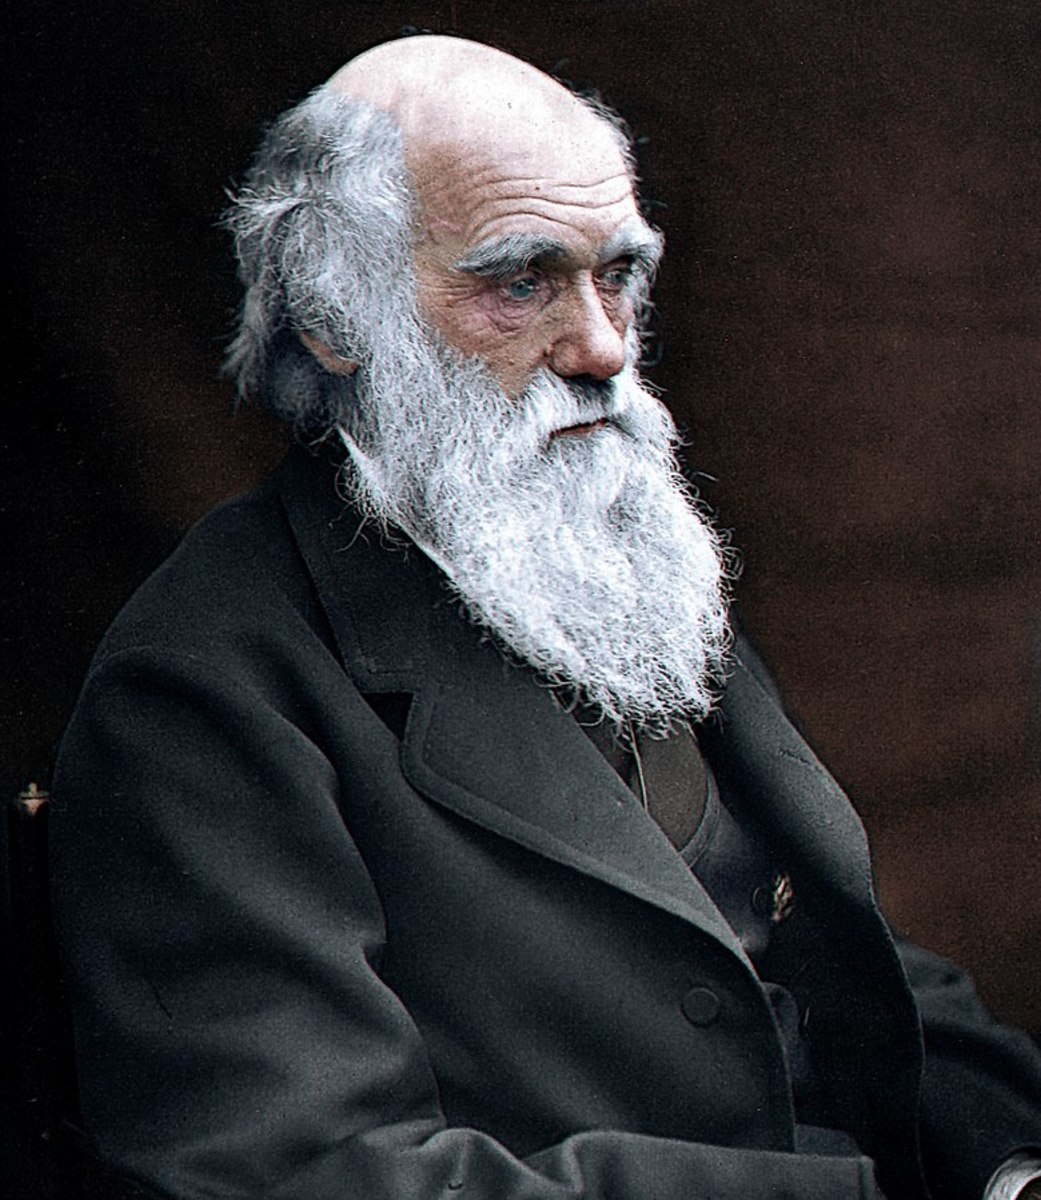 Charles Darwin exemplified the unshaven, shaggy look of the Victorian age.